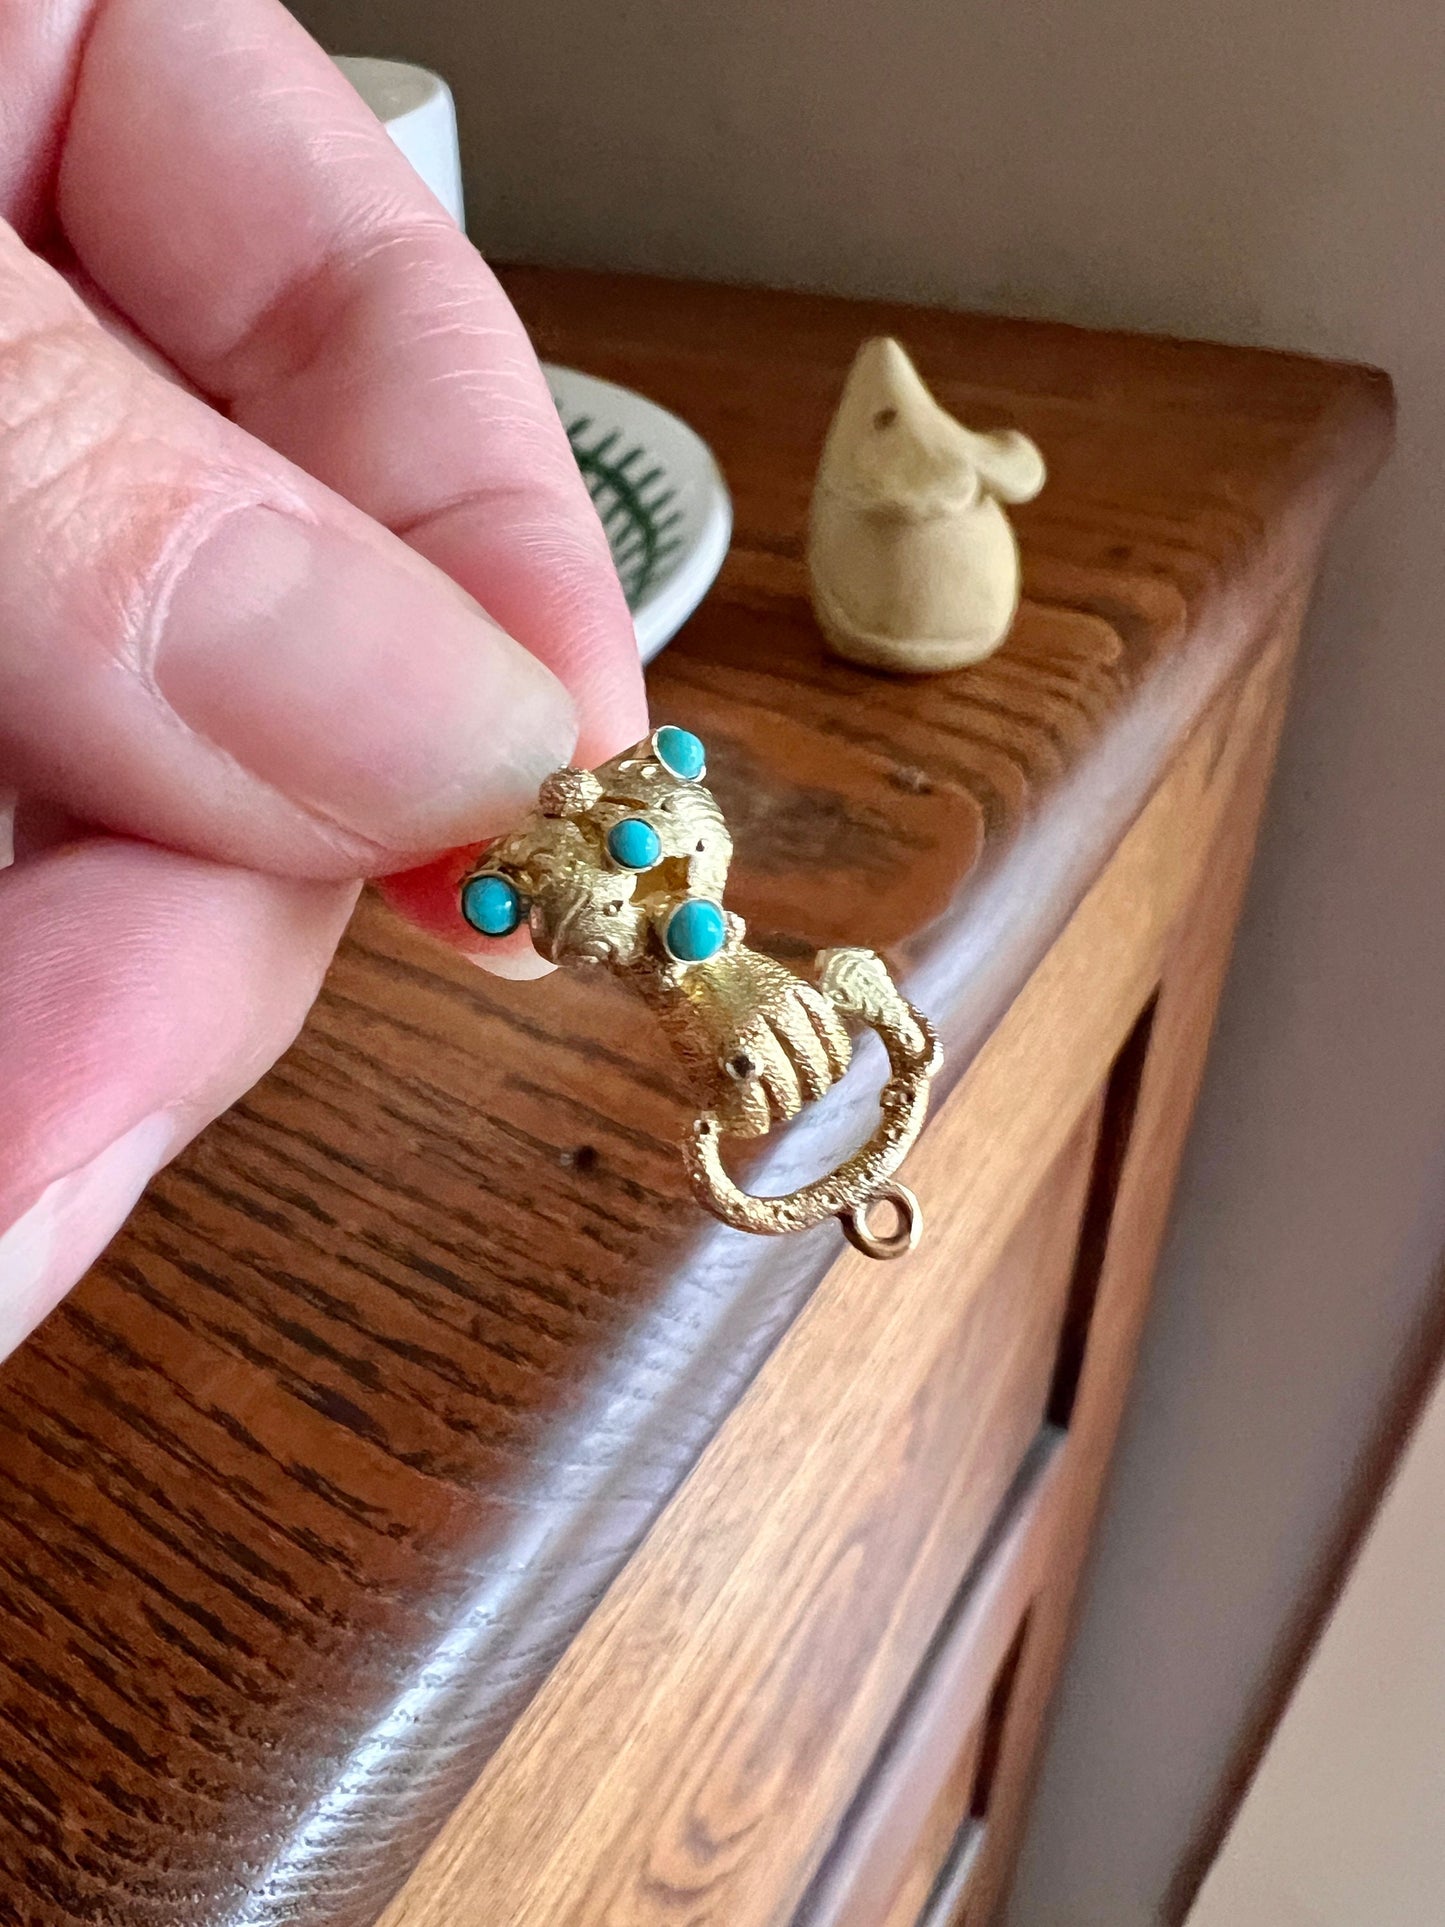 HAND Holding SNAKE Gemset CLASP Victorian Pendant 14k Gold Figural Floral Cuff Wearing Diamond Ring Turquoise Bead Romantic Gift 3D Detail